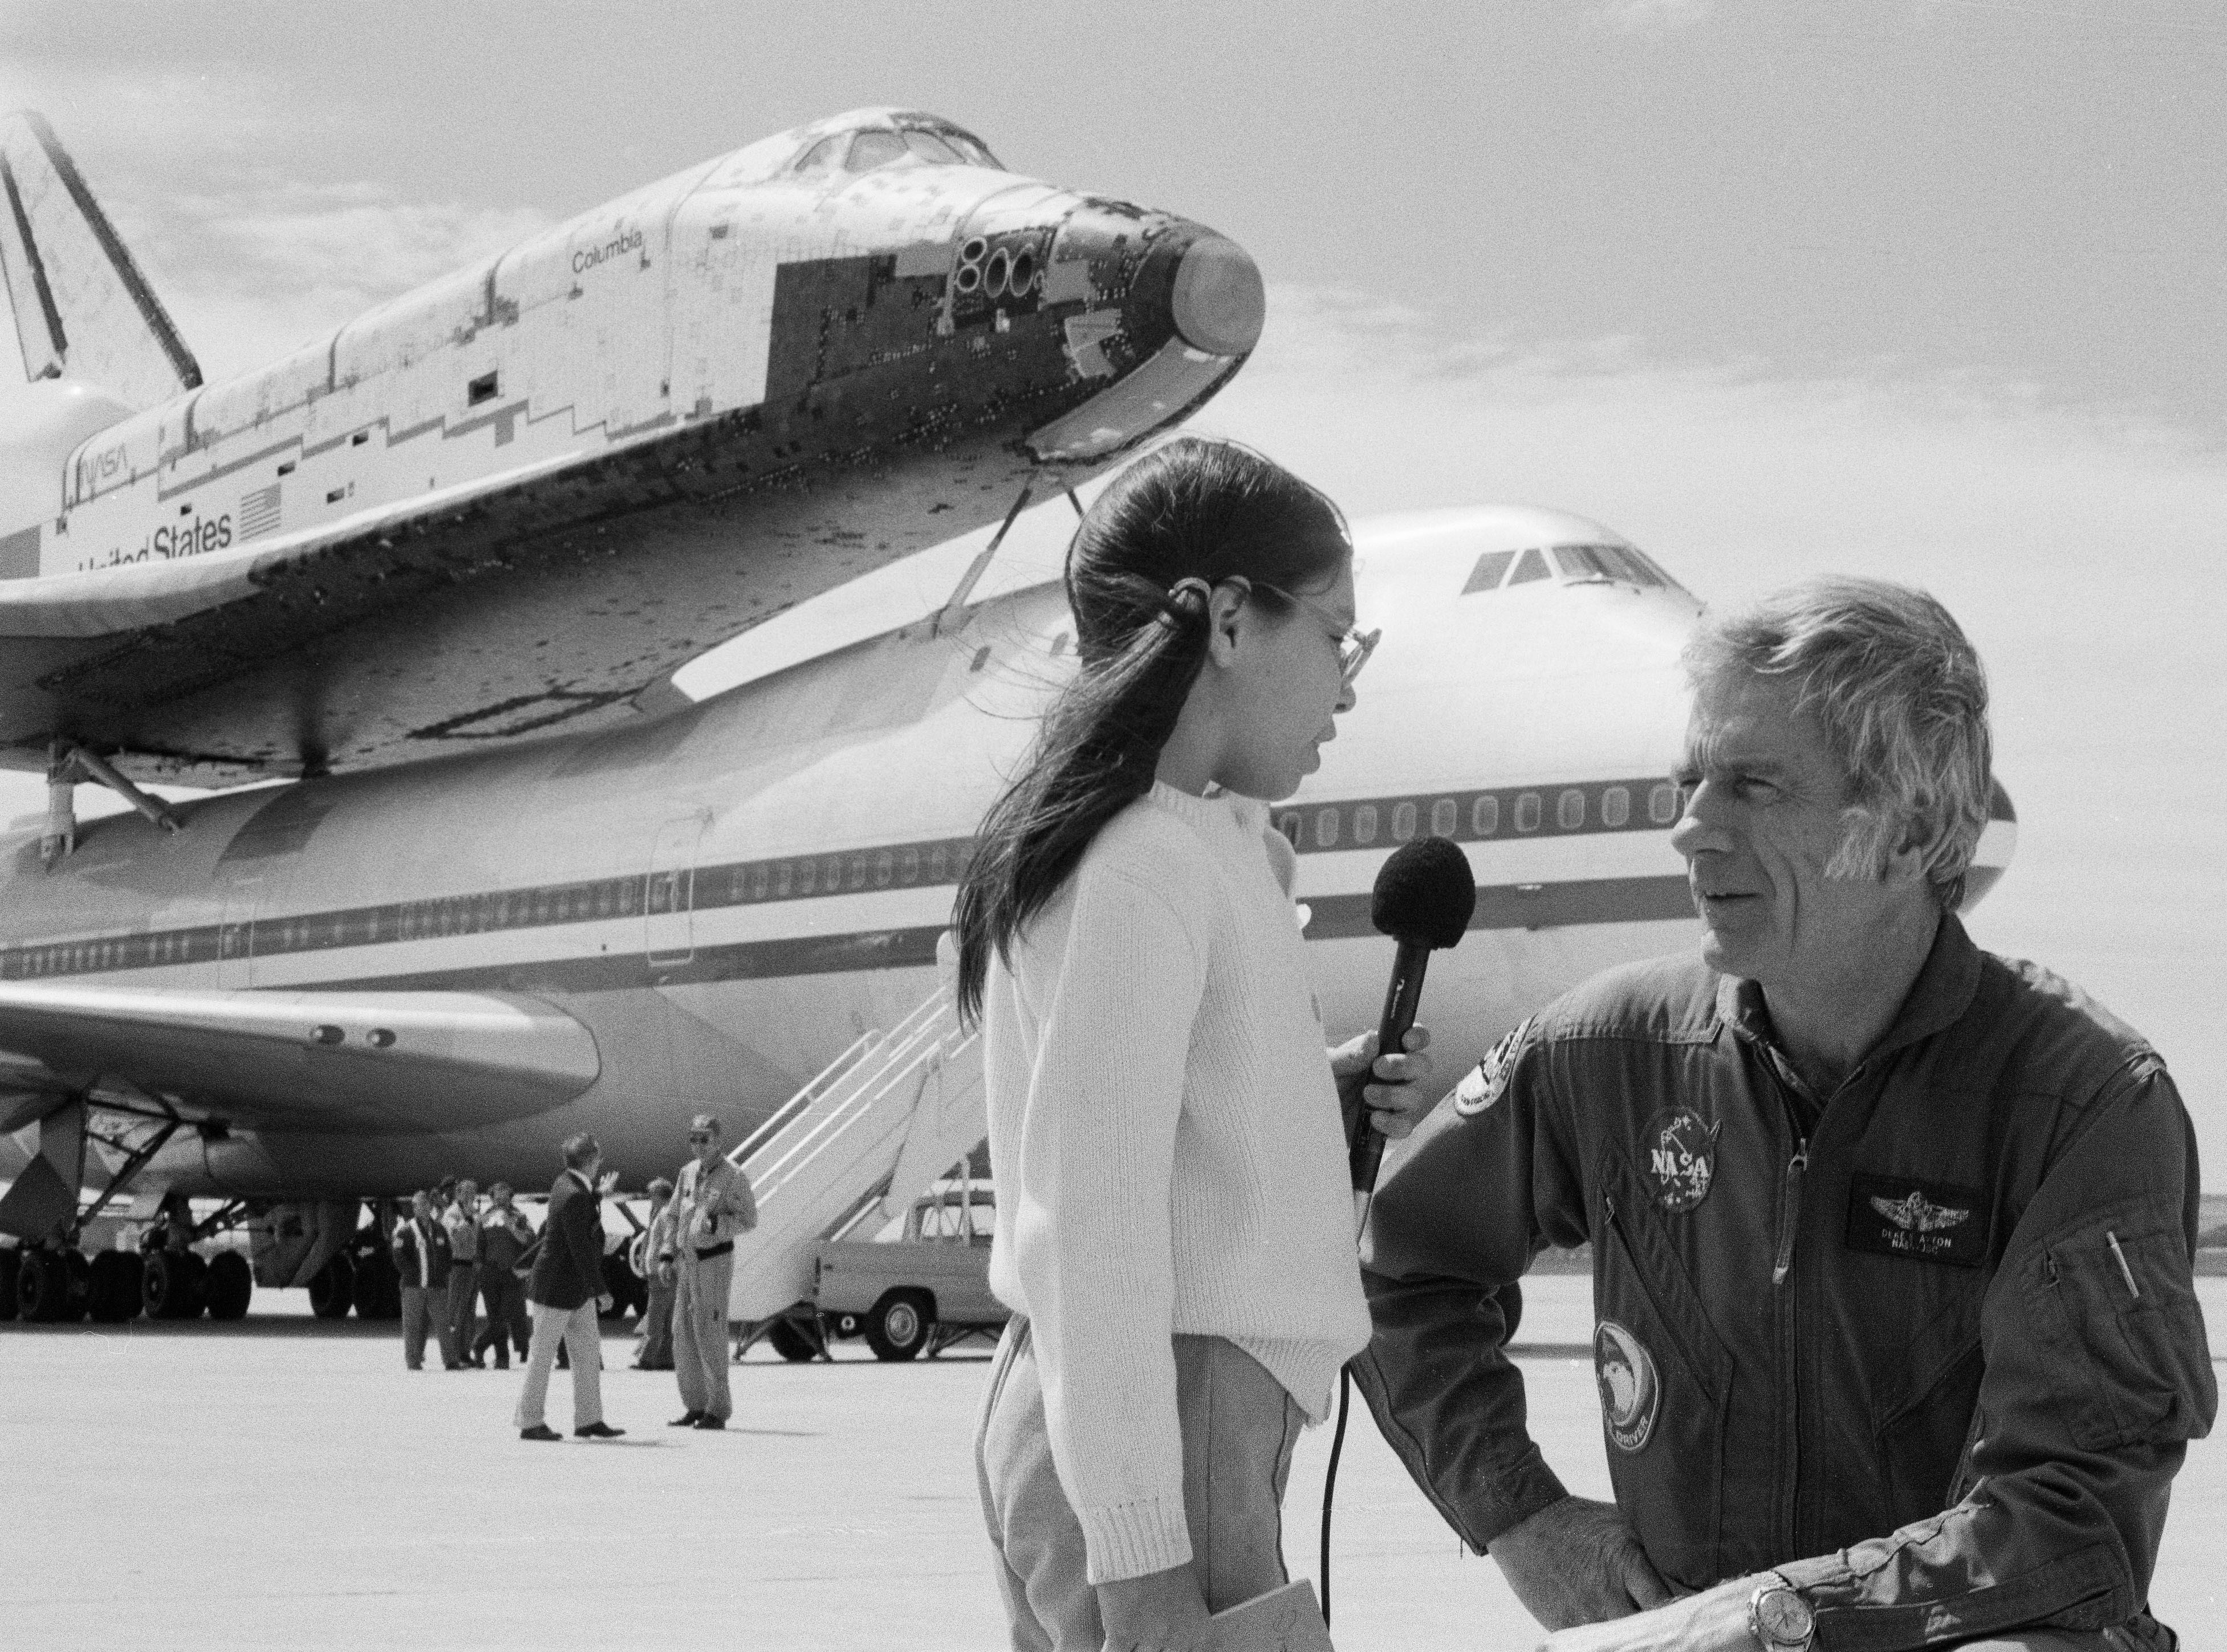 Tina Aguilar, age nine, an aspiring young reporter, interviews astronaut Donald K. “Deke” Slayton in front of Columbia and the SCA at Kelly AFB